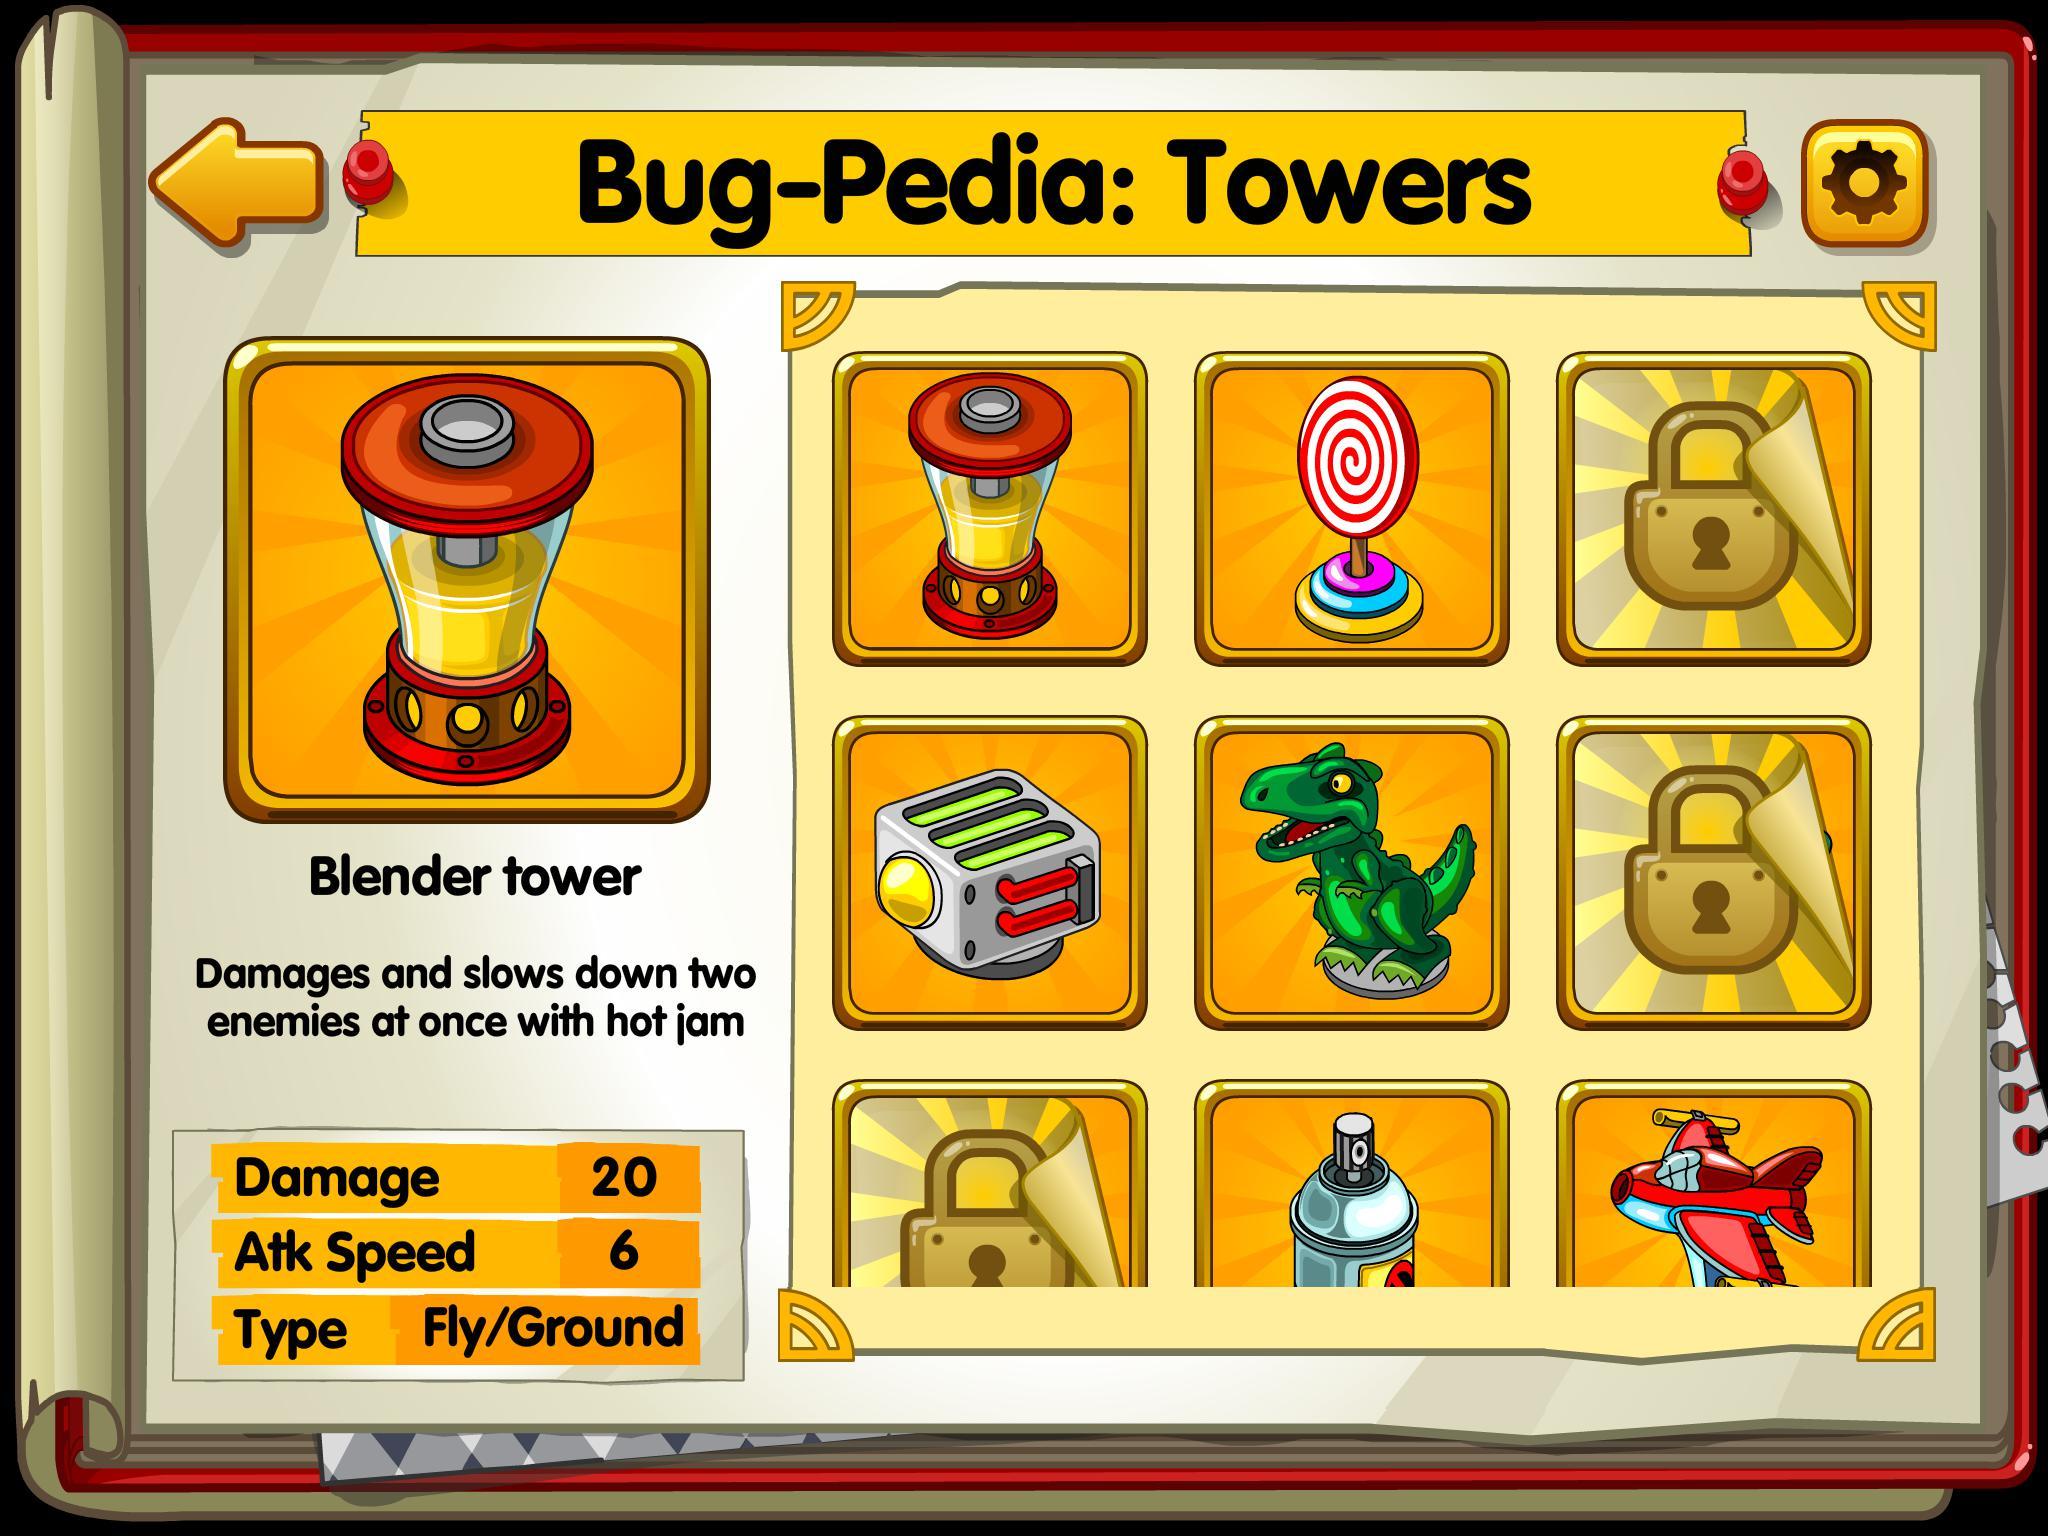 Game is bugged. Bugs игра. Bugs Invasion игра. Bug td. Game Bugs Defence.